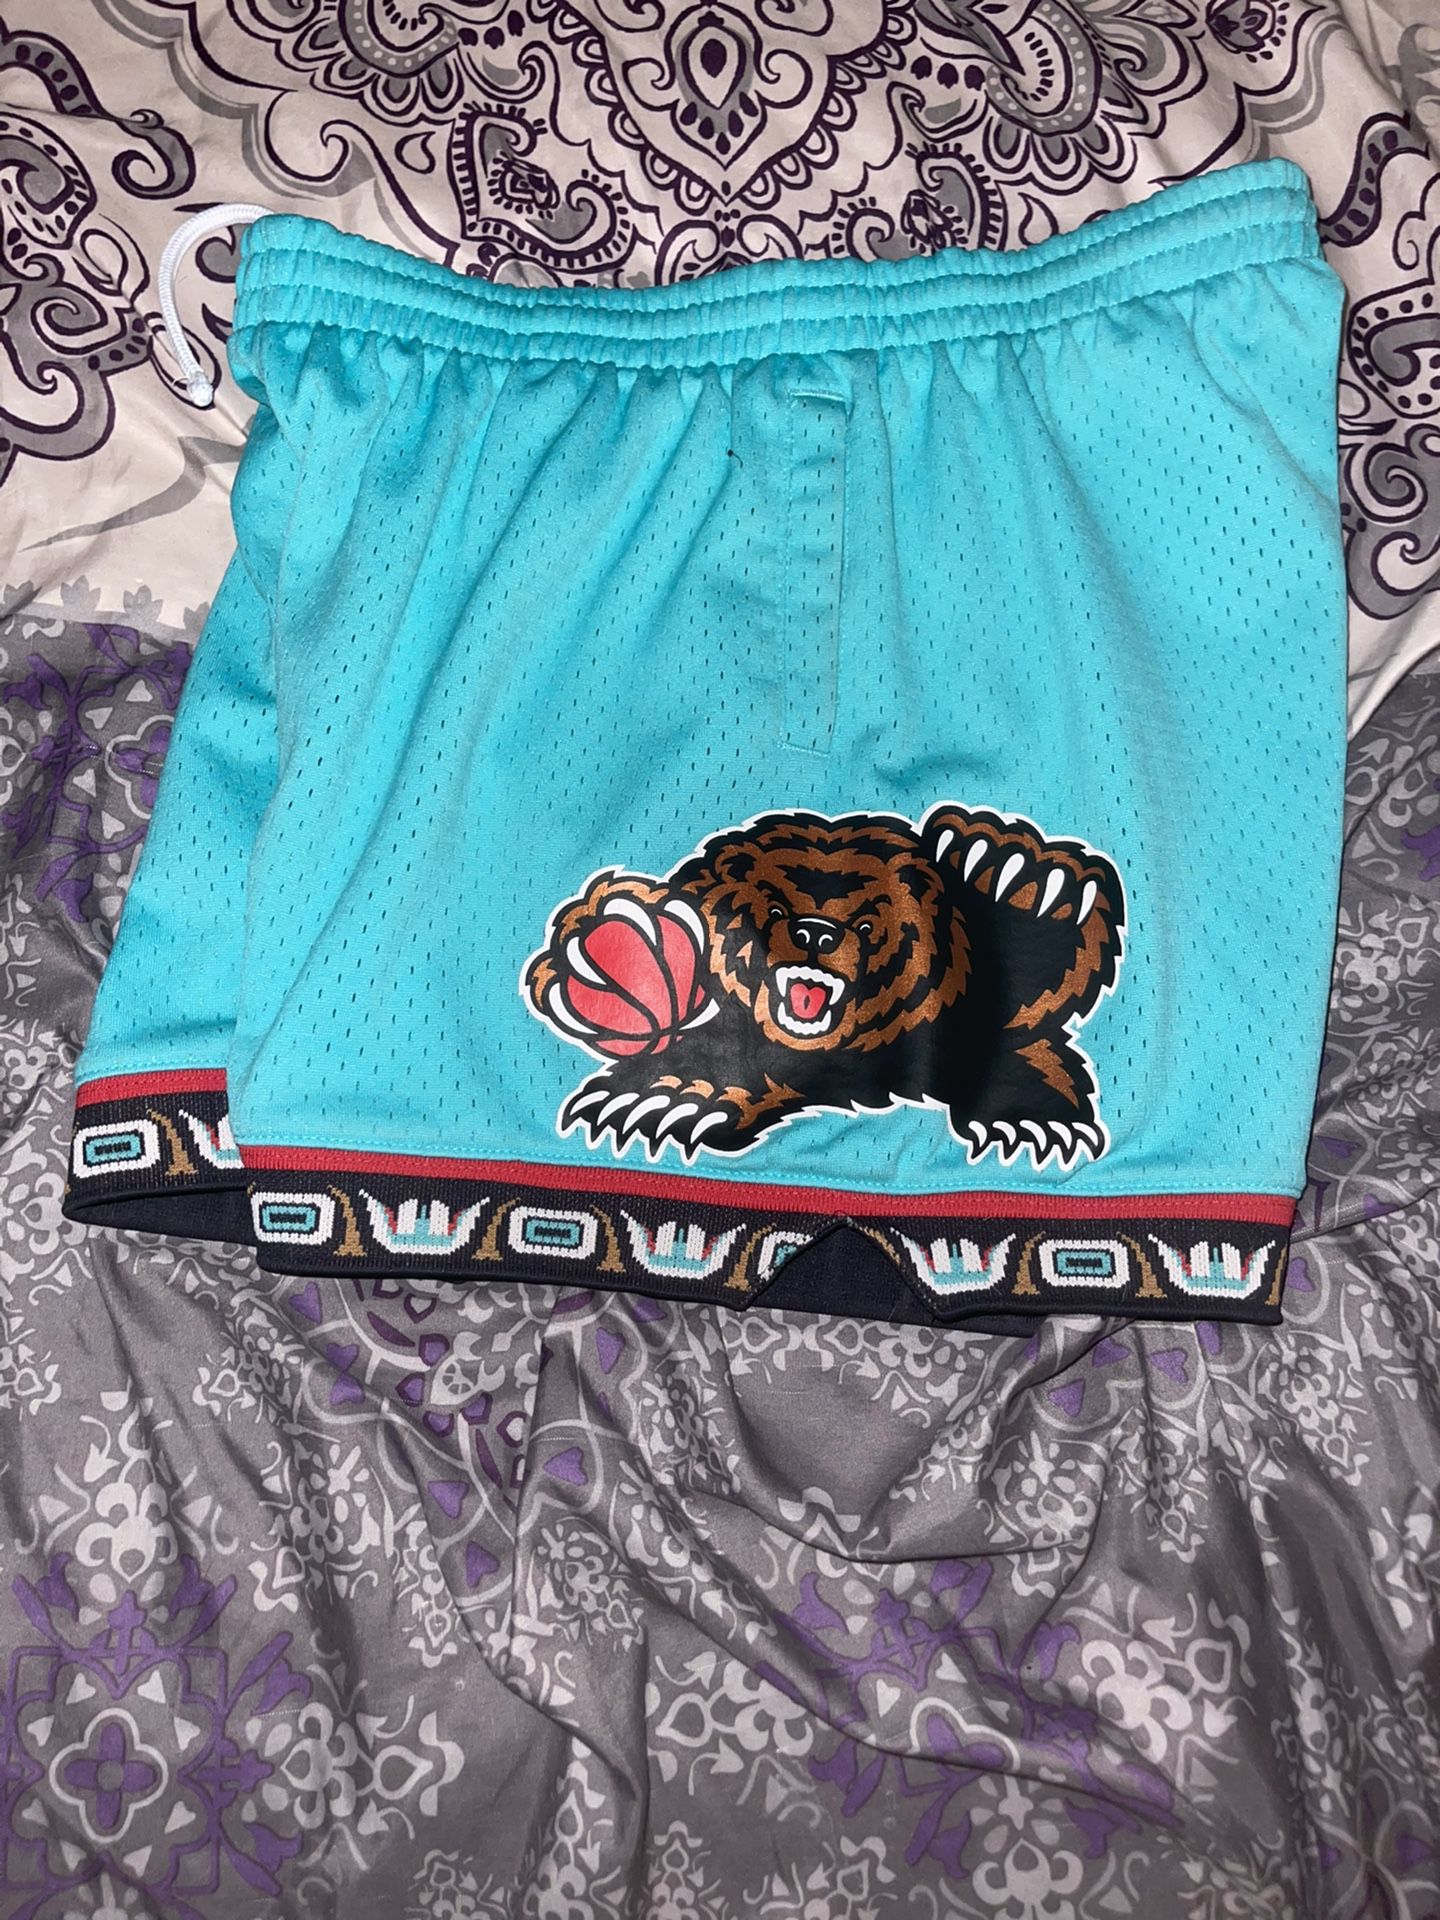 Memphis Grizzlies Hardwood Classic Shorts for Sale in Wheeling, IL - OfferUp